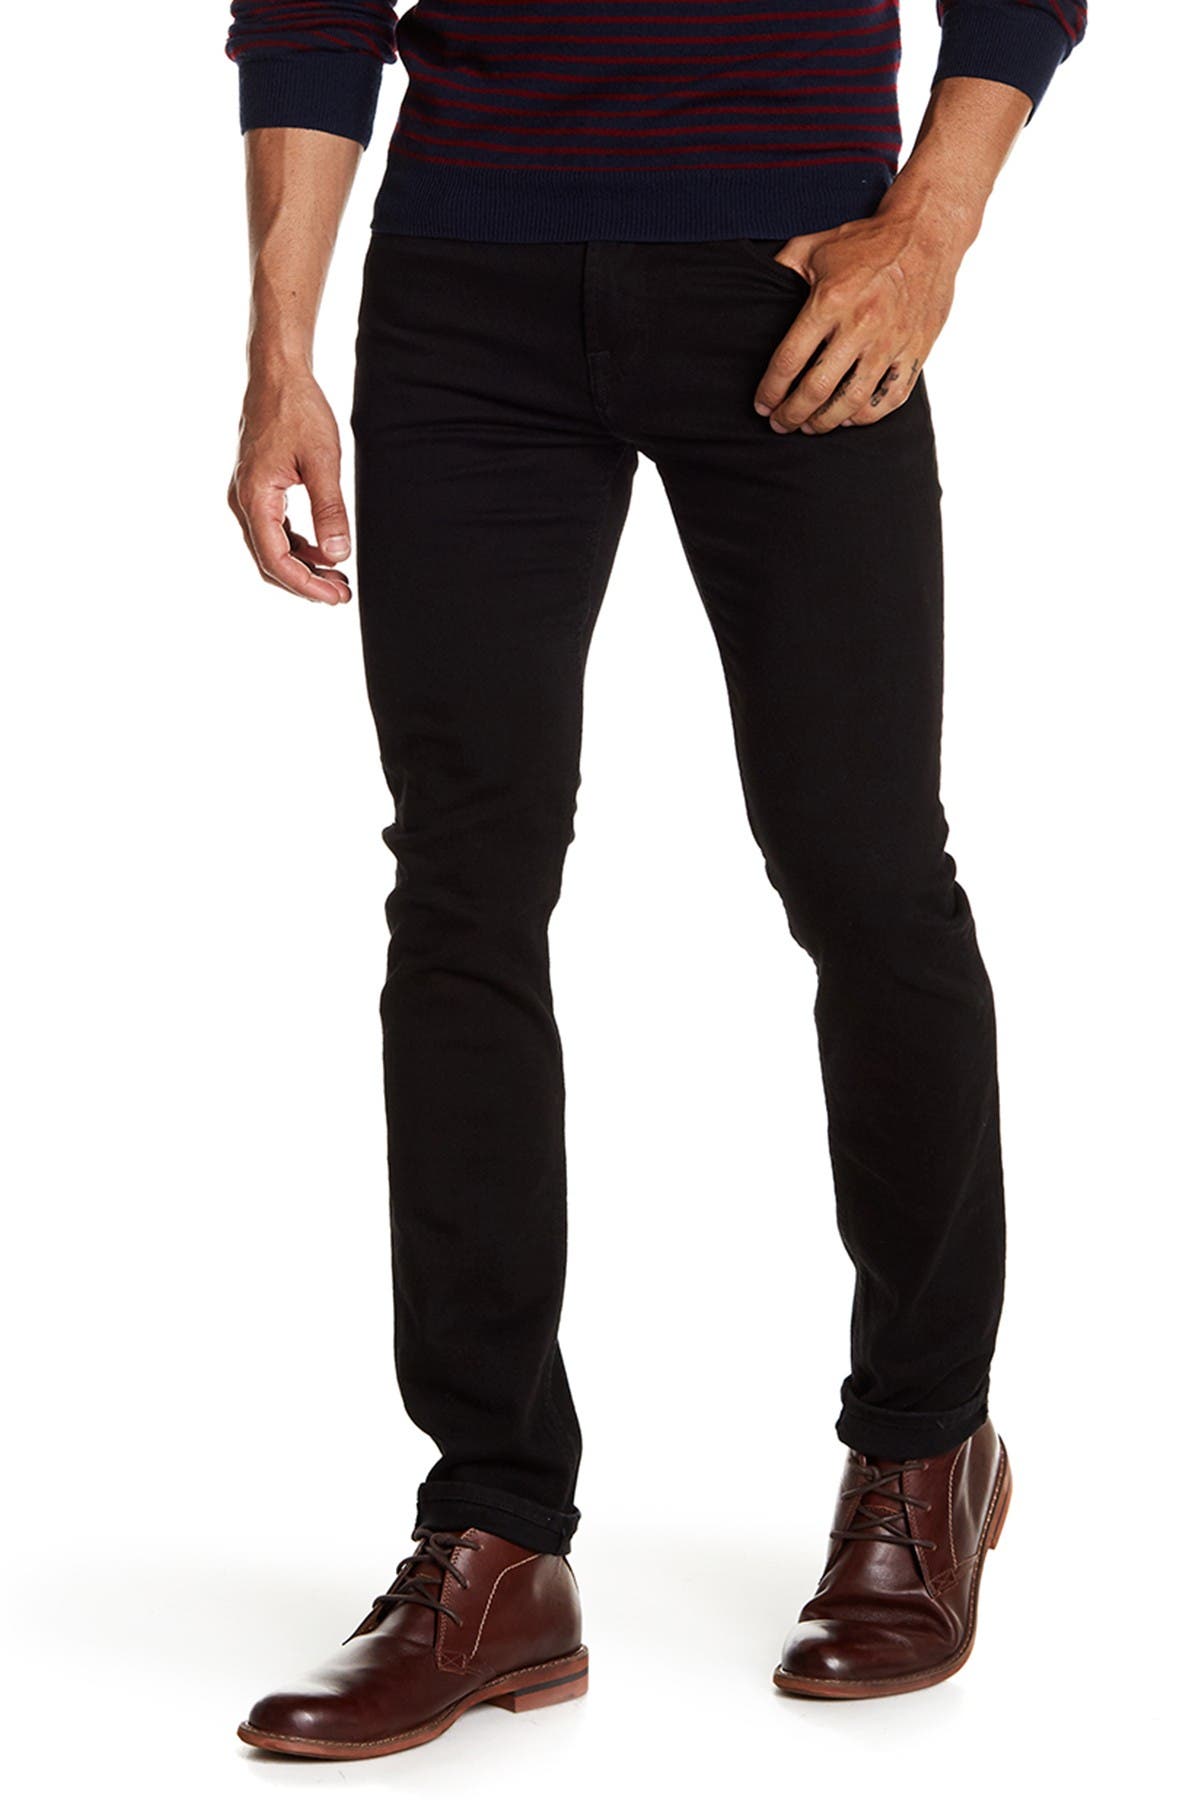 7 for all mankind paxtyn jeans